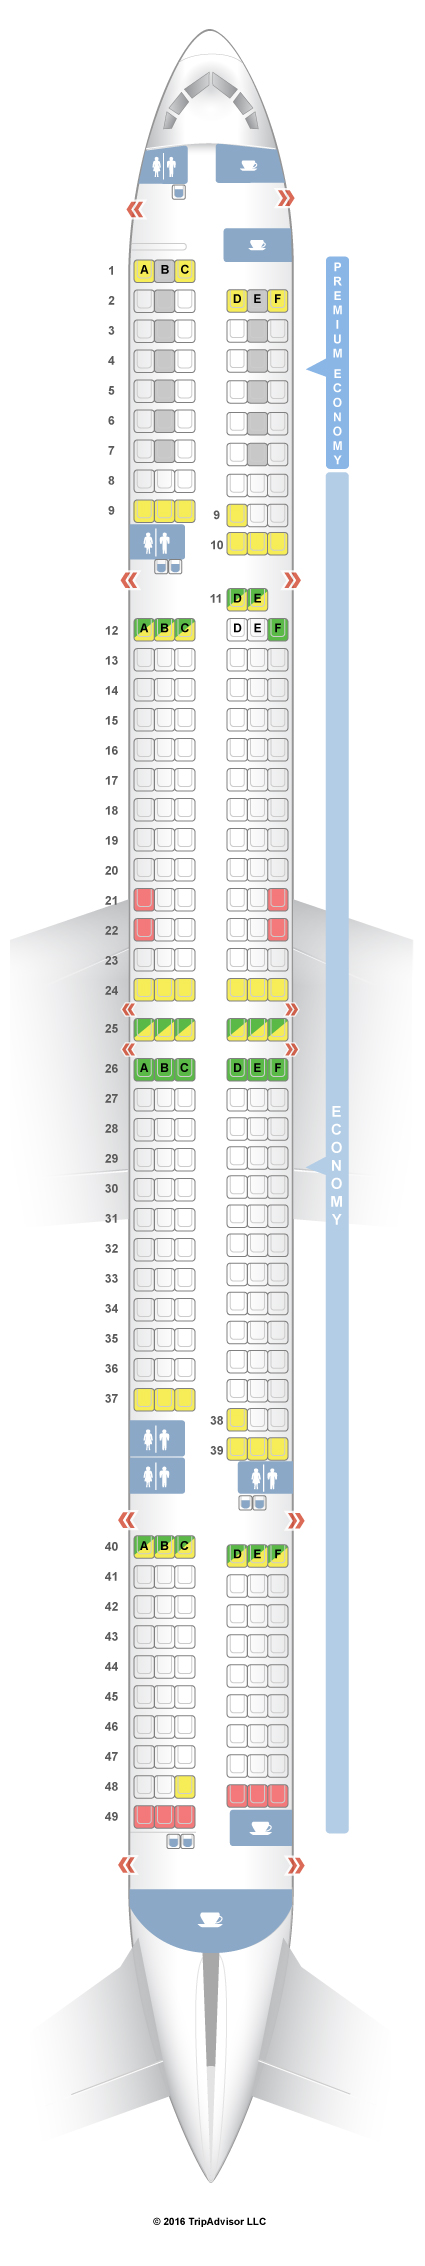 Condor Airlines Seating Chart